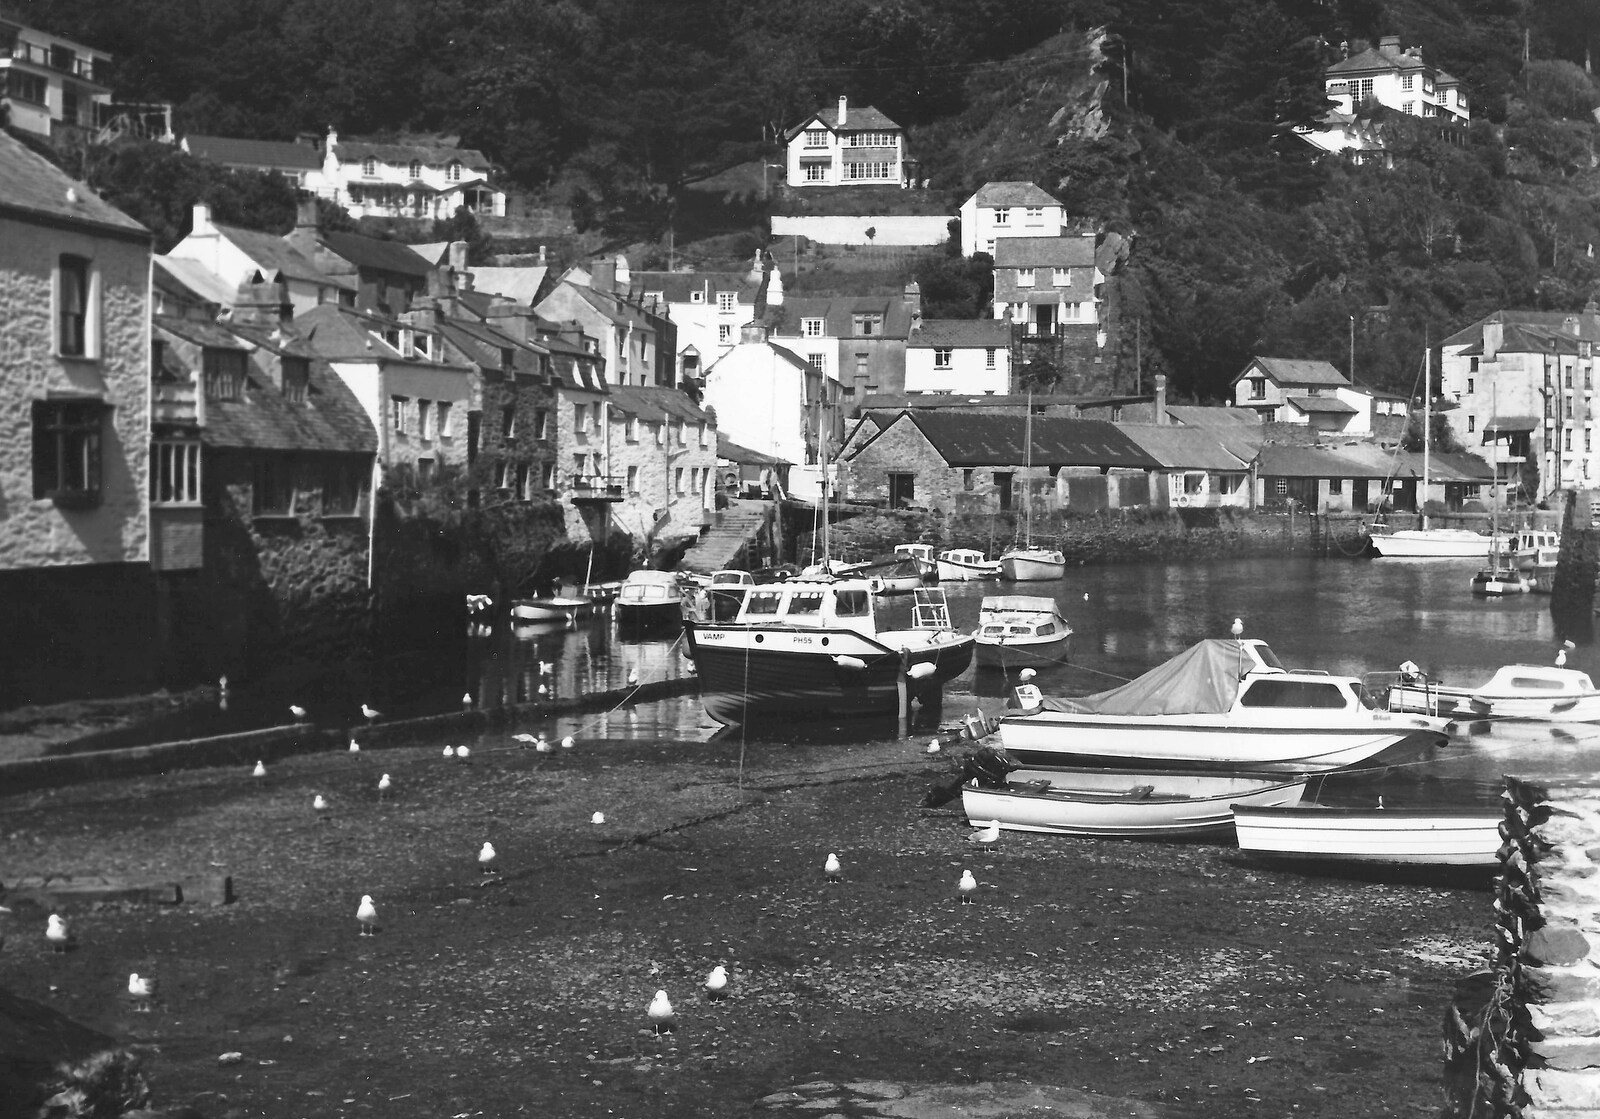 The tide's out on the river from Uni: The Last Day of Term, Plymouth Polytechnic, Devon - 2nd June 1987